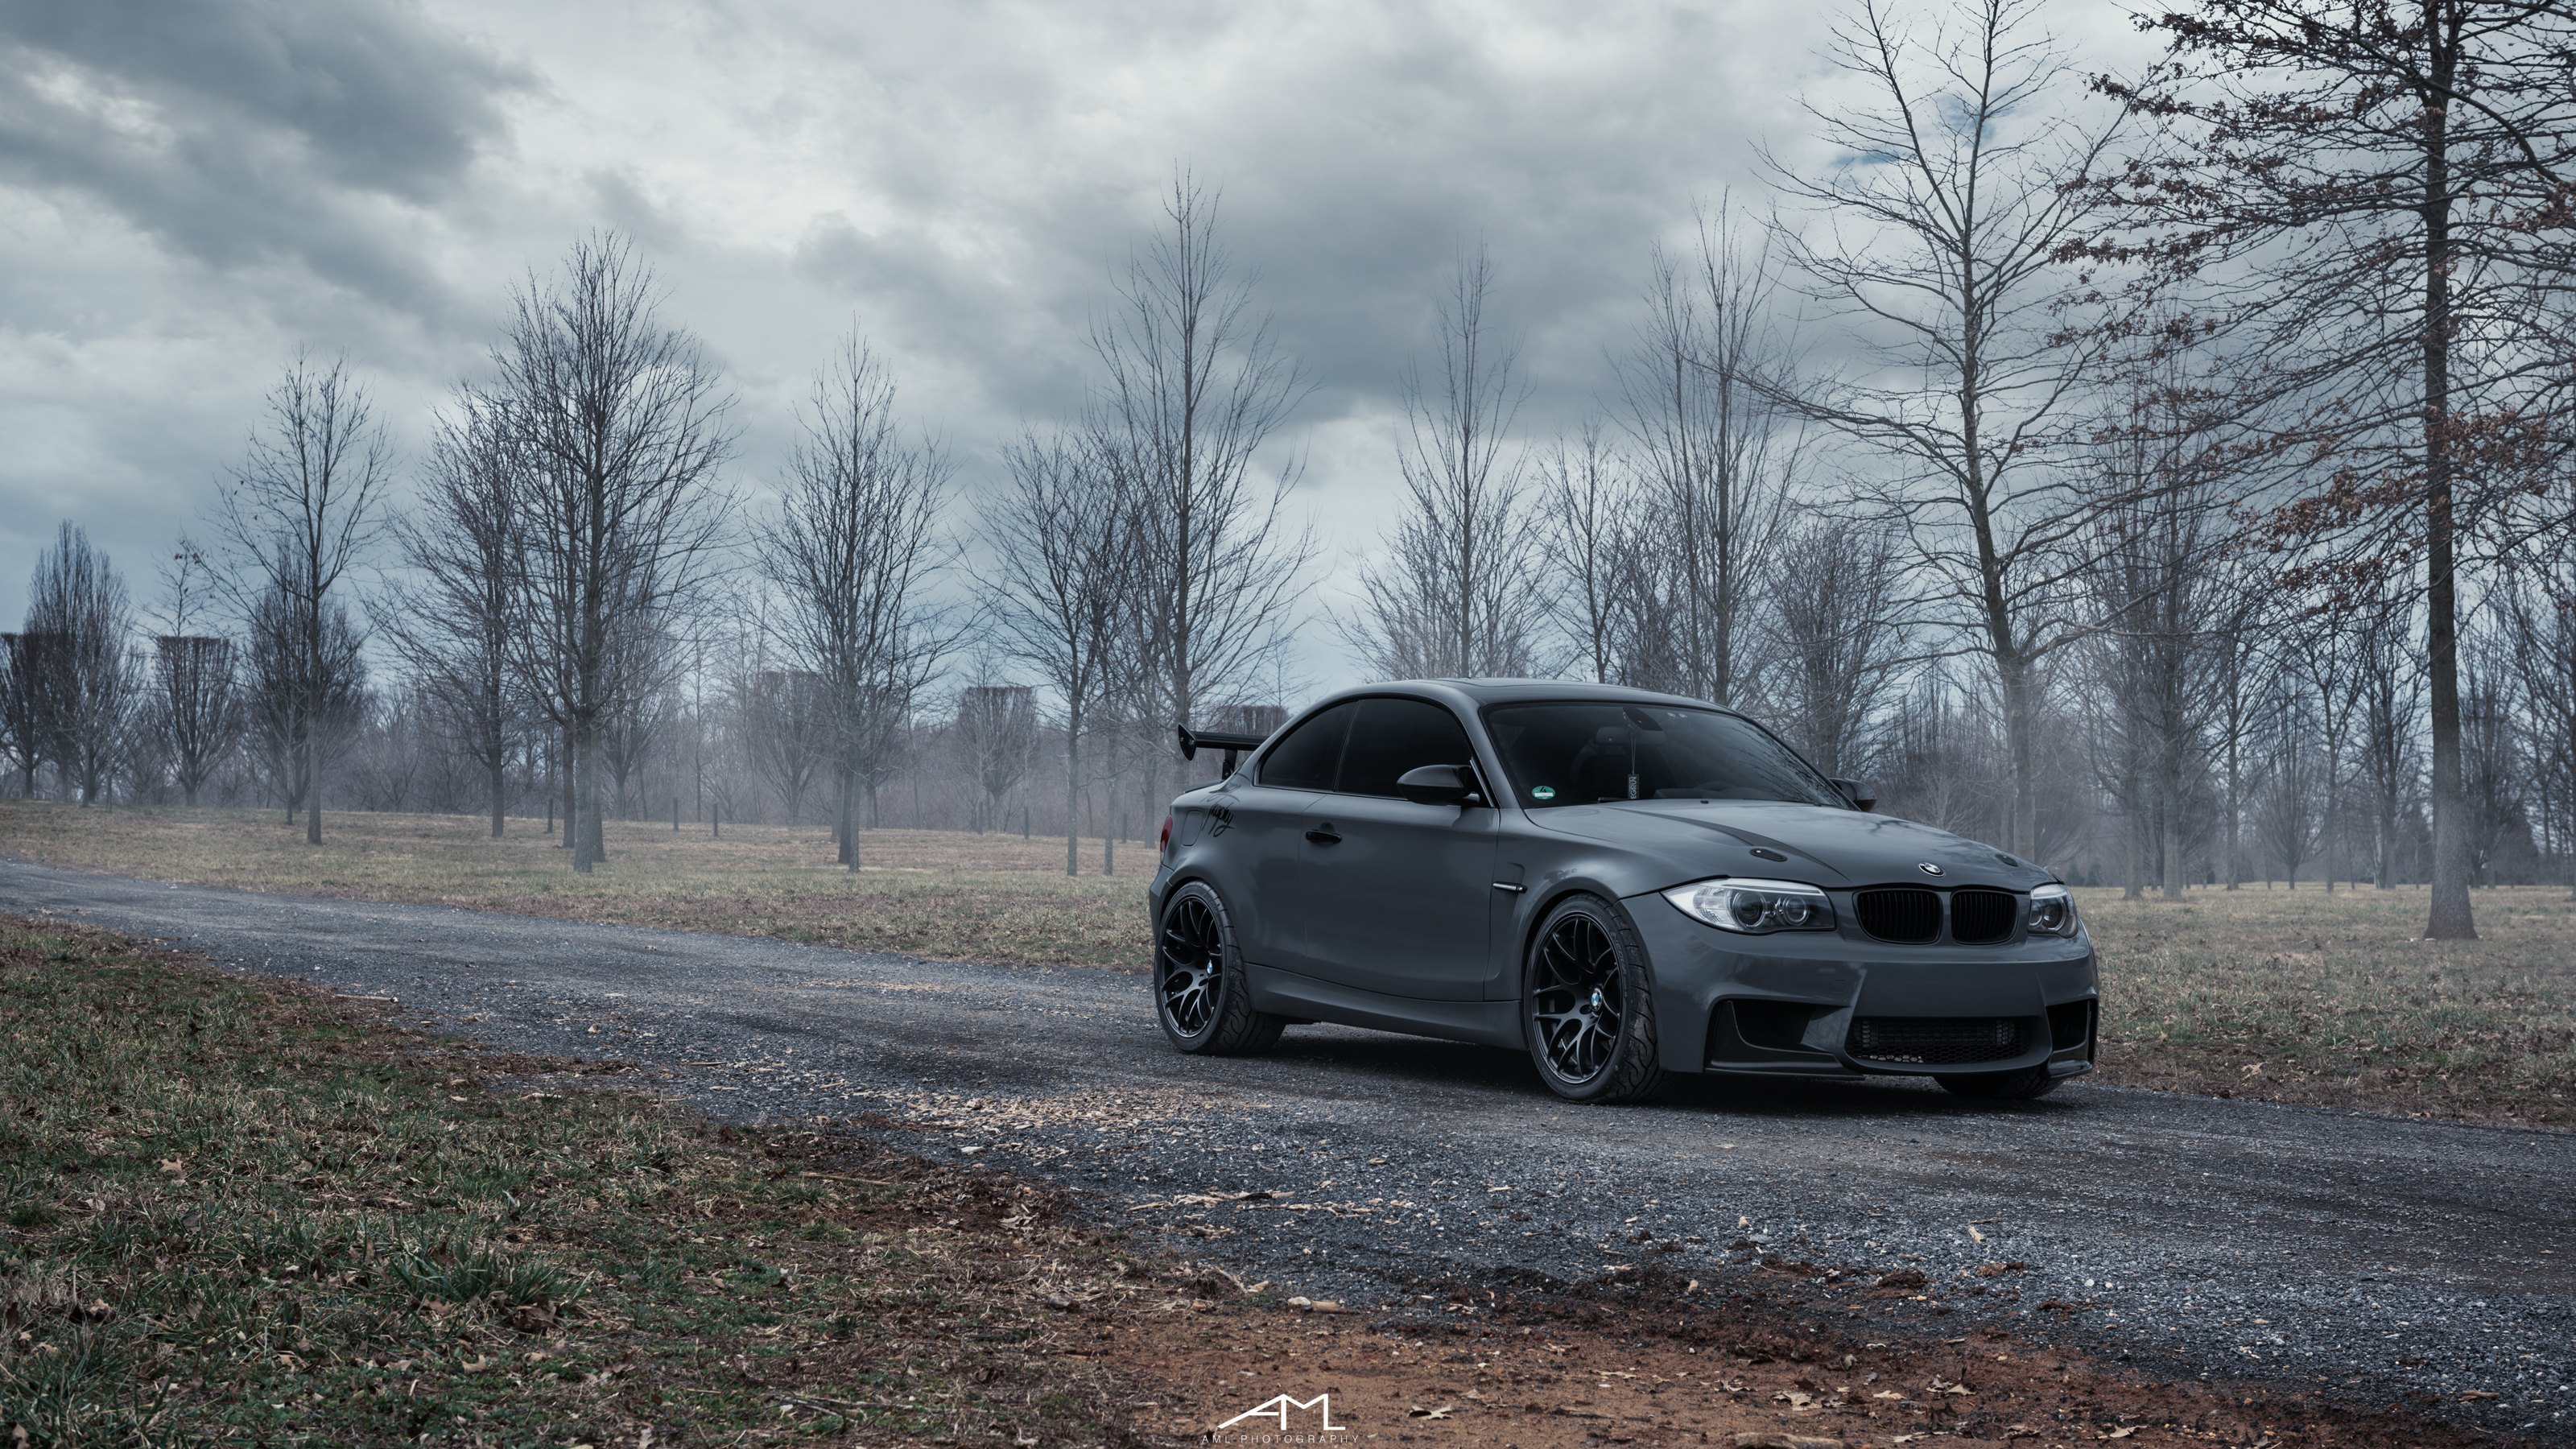 Aftermarket Vented Hood on Gray BMW 1-Series - Photo by Arlen Liverman